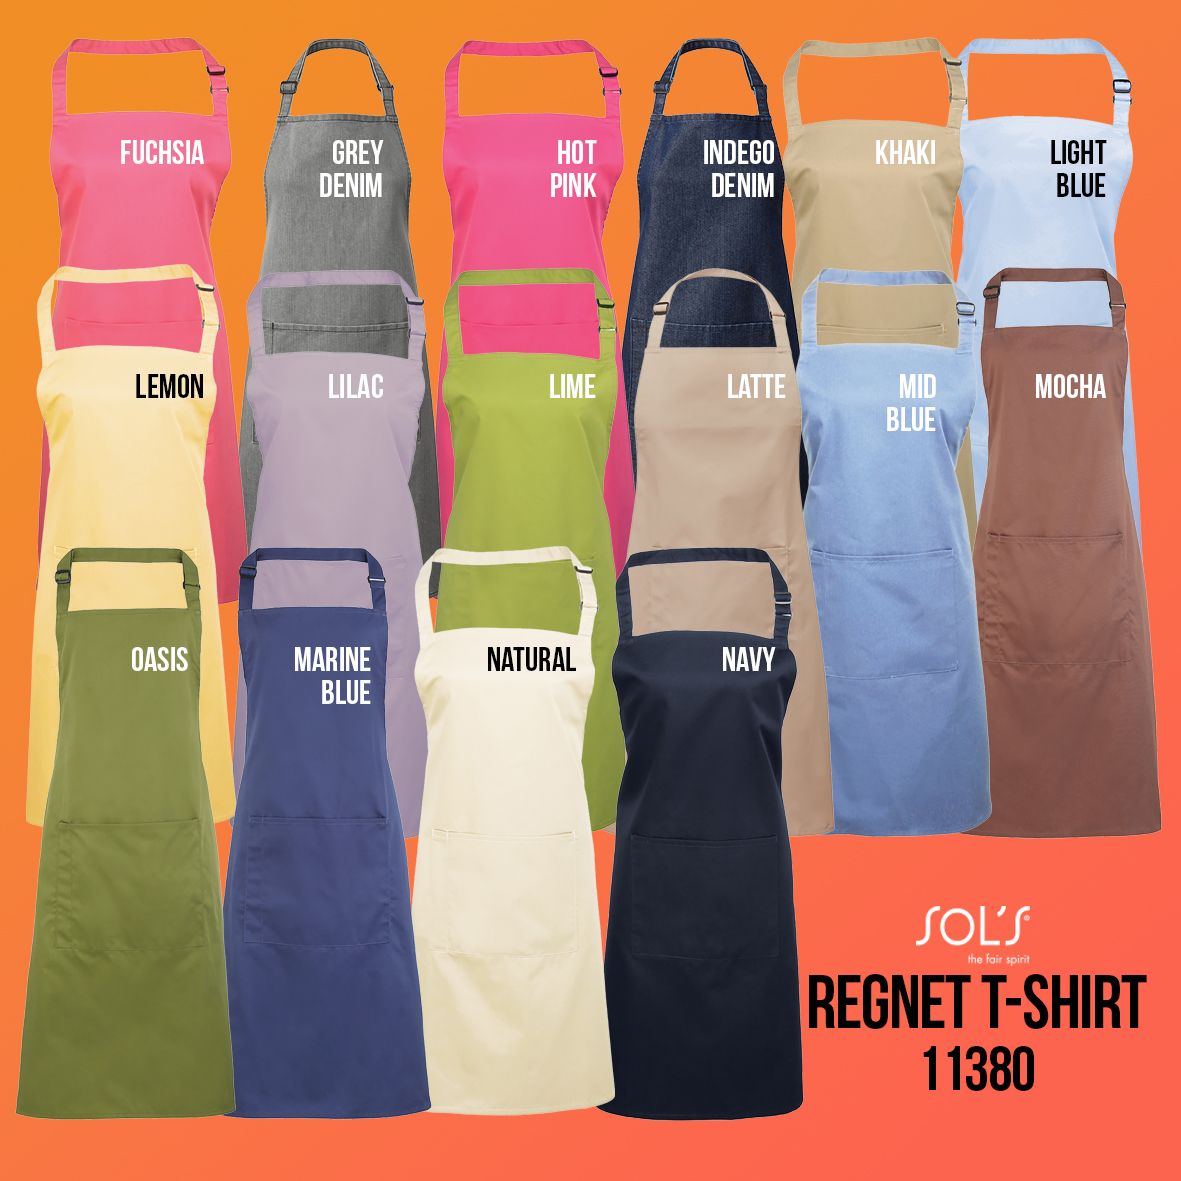 Apron & T-Shirt - Workwear Pack - Includes Free Logo